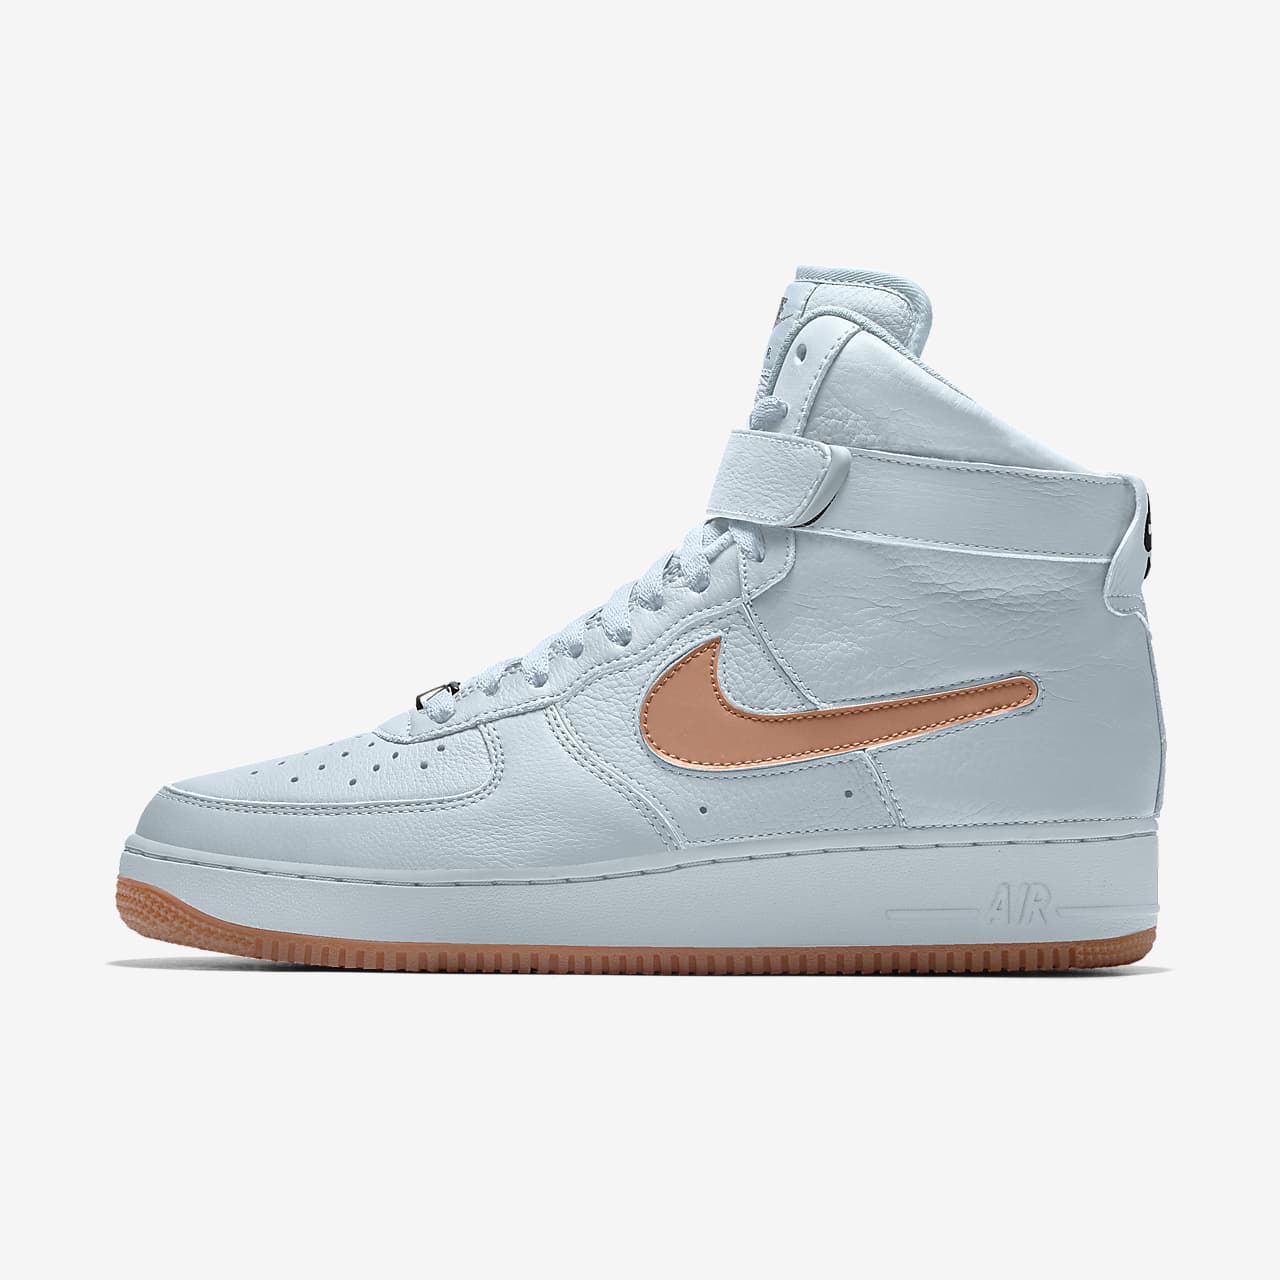 Scarpa personalizzabile Nike Air Force 1/1 Unlocked By You. Nike CH